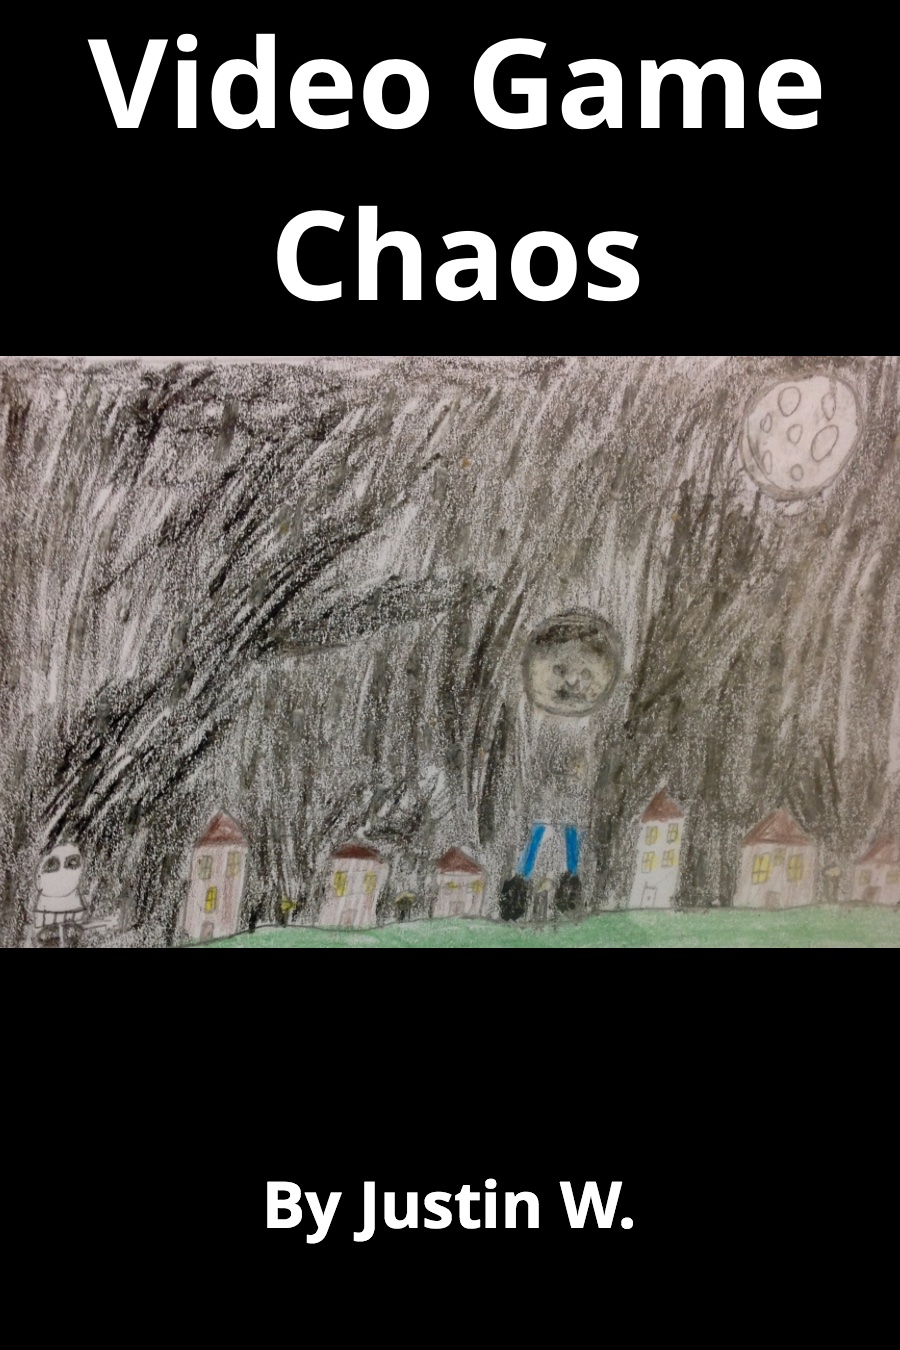 Video Games Chaos by Justin W